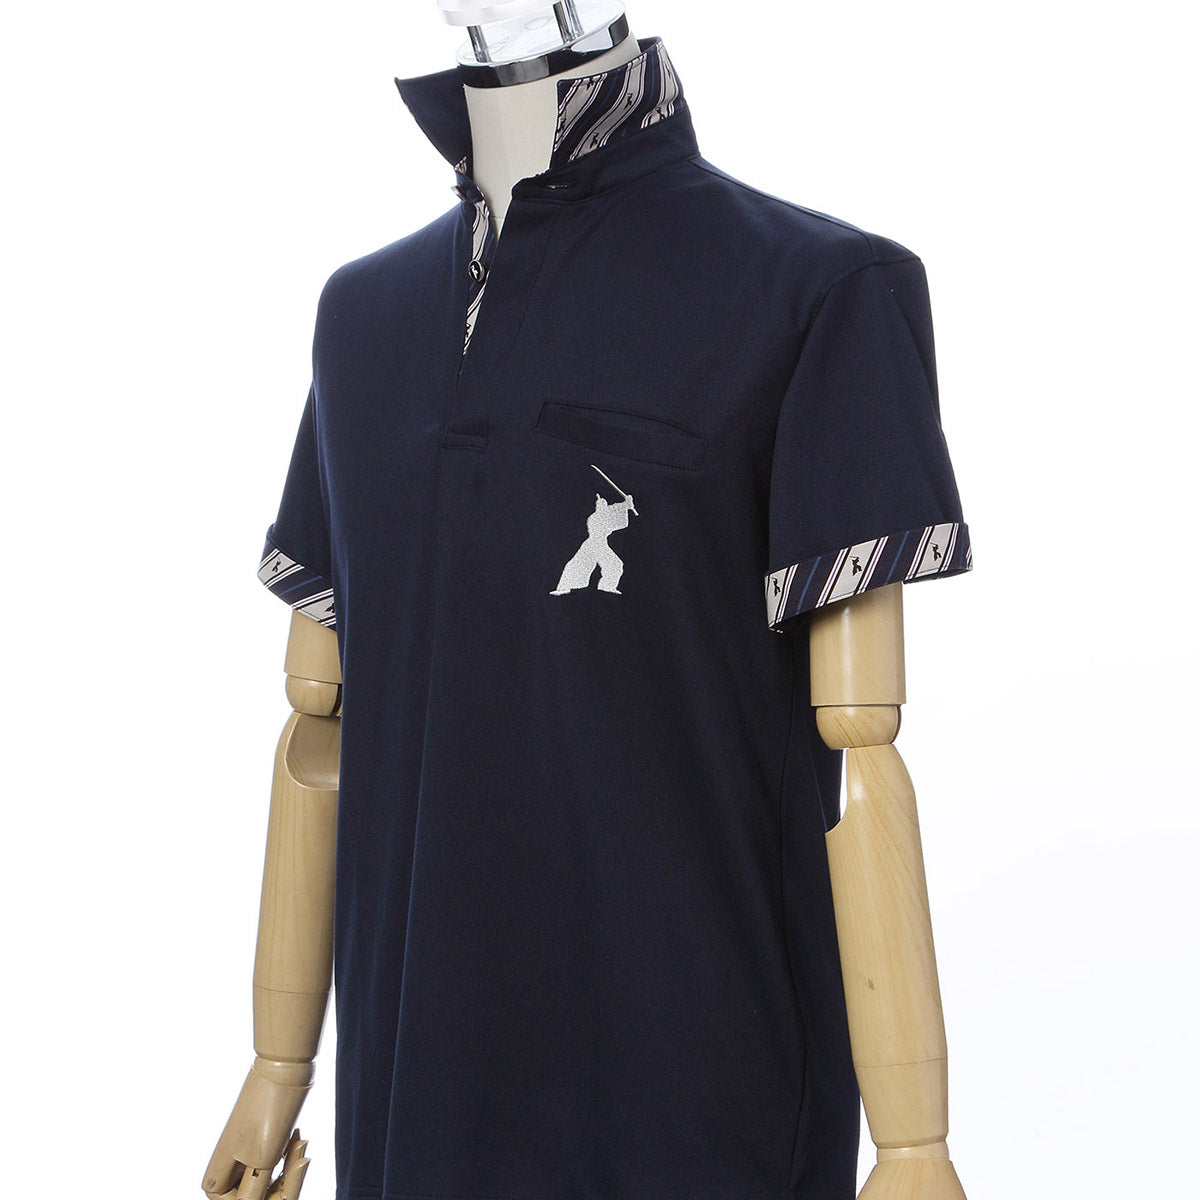 Men’s Quick Dry Sports Polo Shirt Short Sleeve with chest pocket 16. Samurai design Made in Japan FORTUNA Tokyo